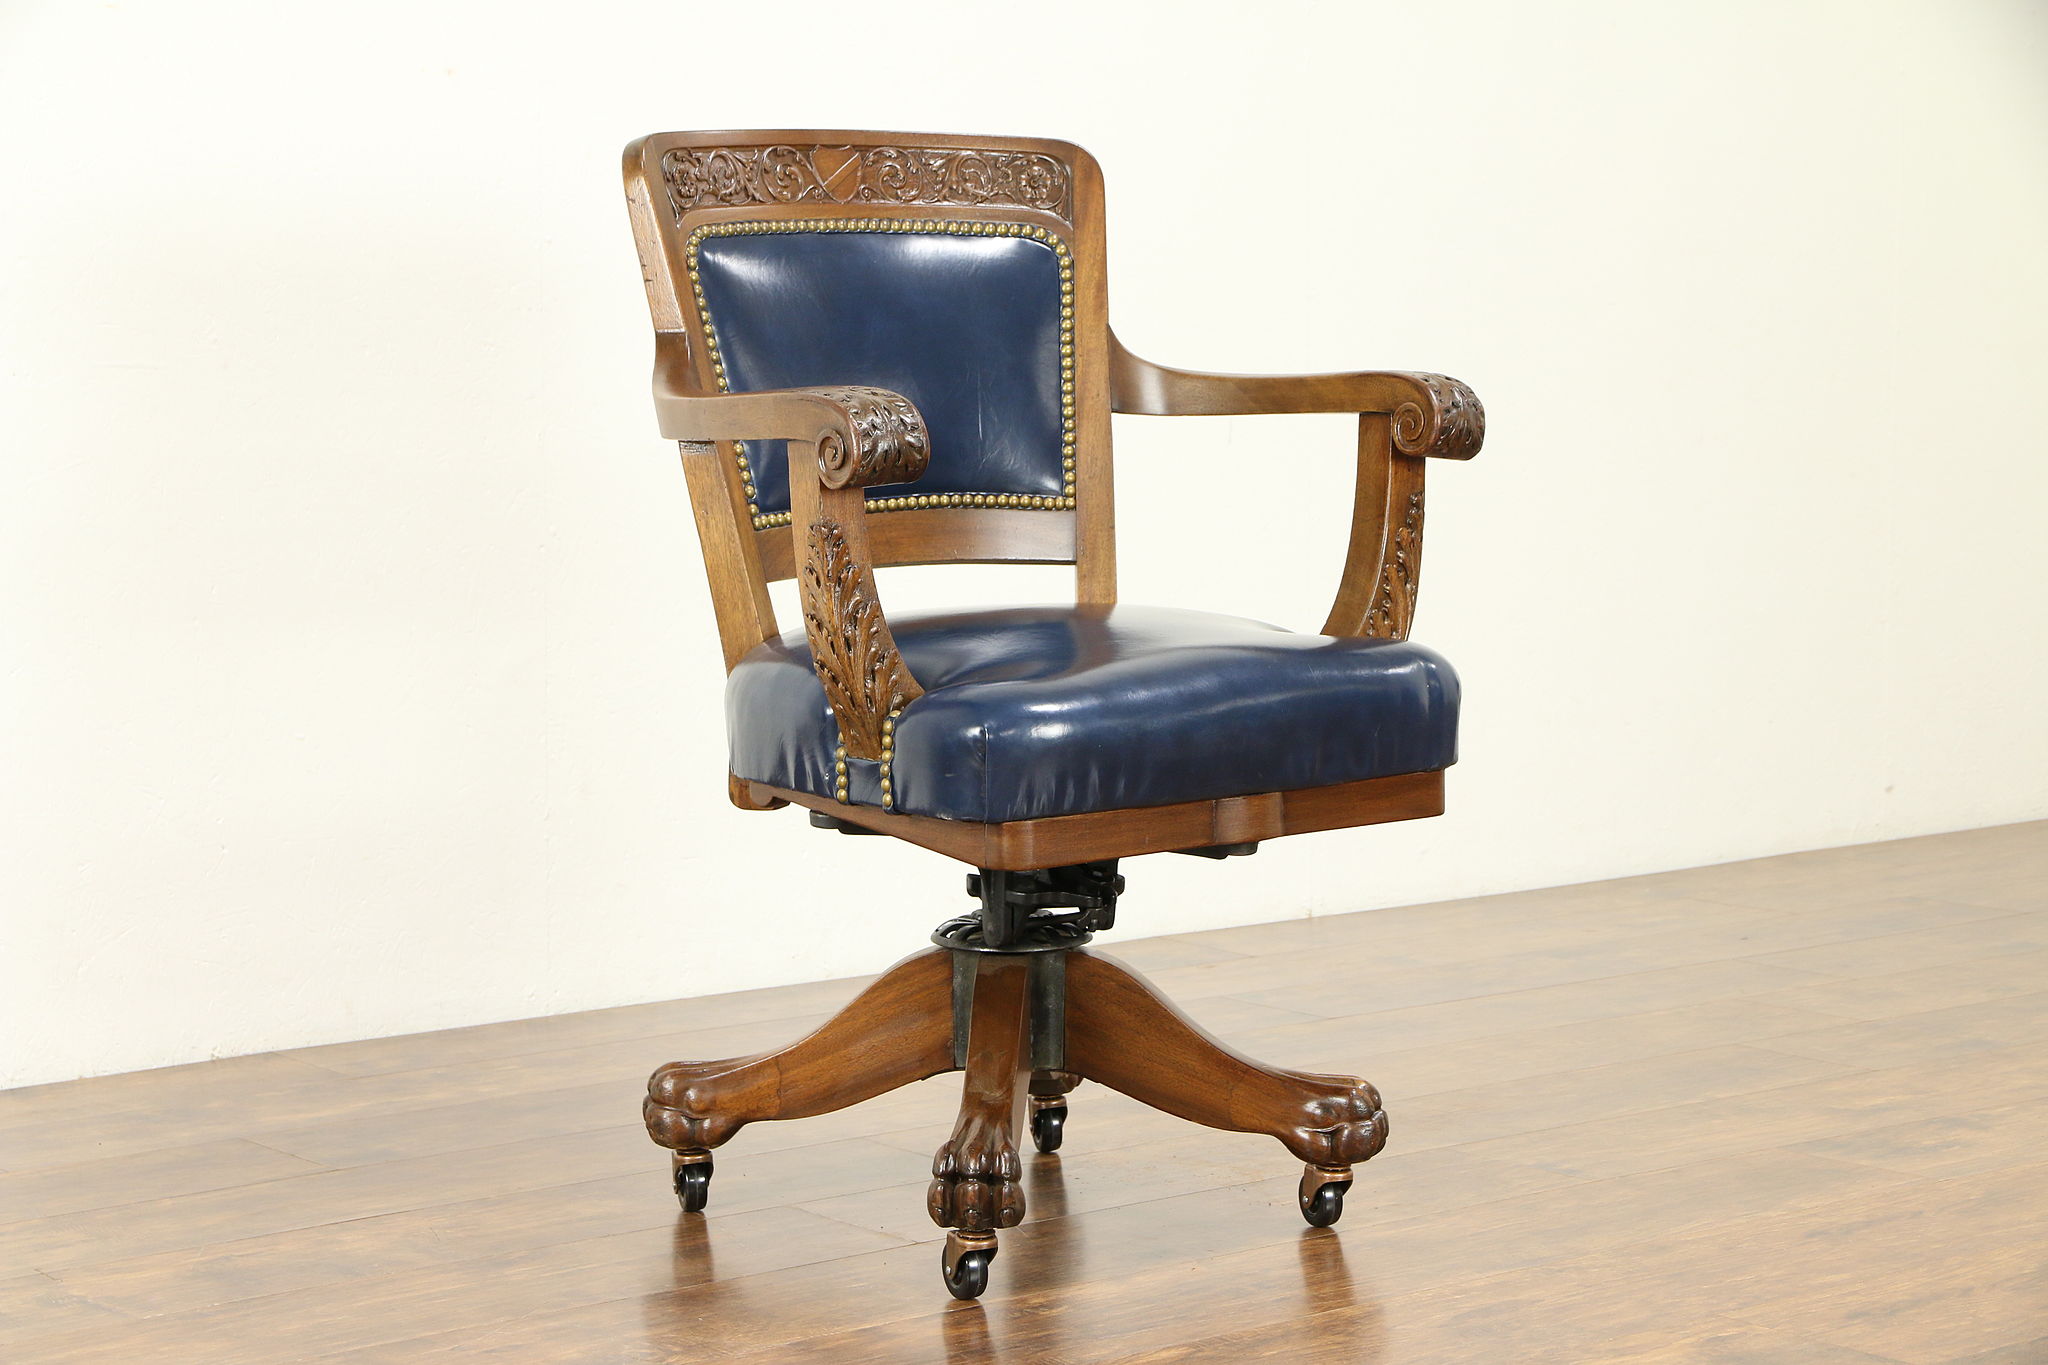 Sold Swivel Mahogany Antique Desk Chair Carved Lion Paws